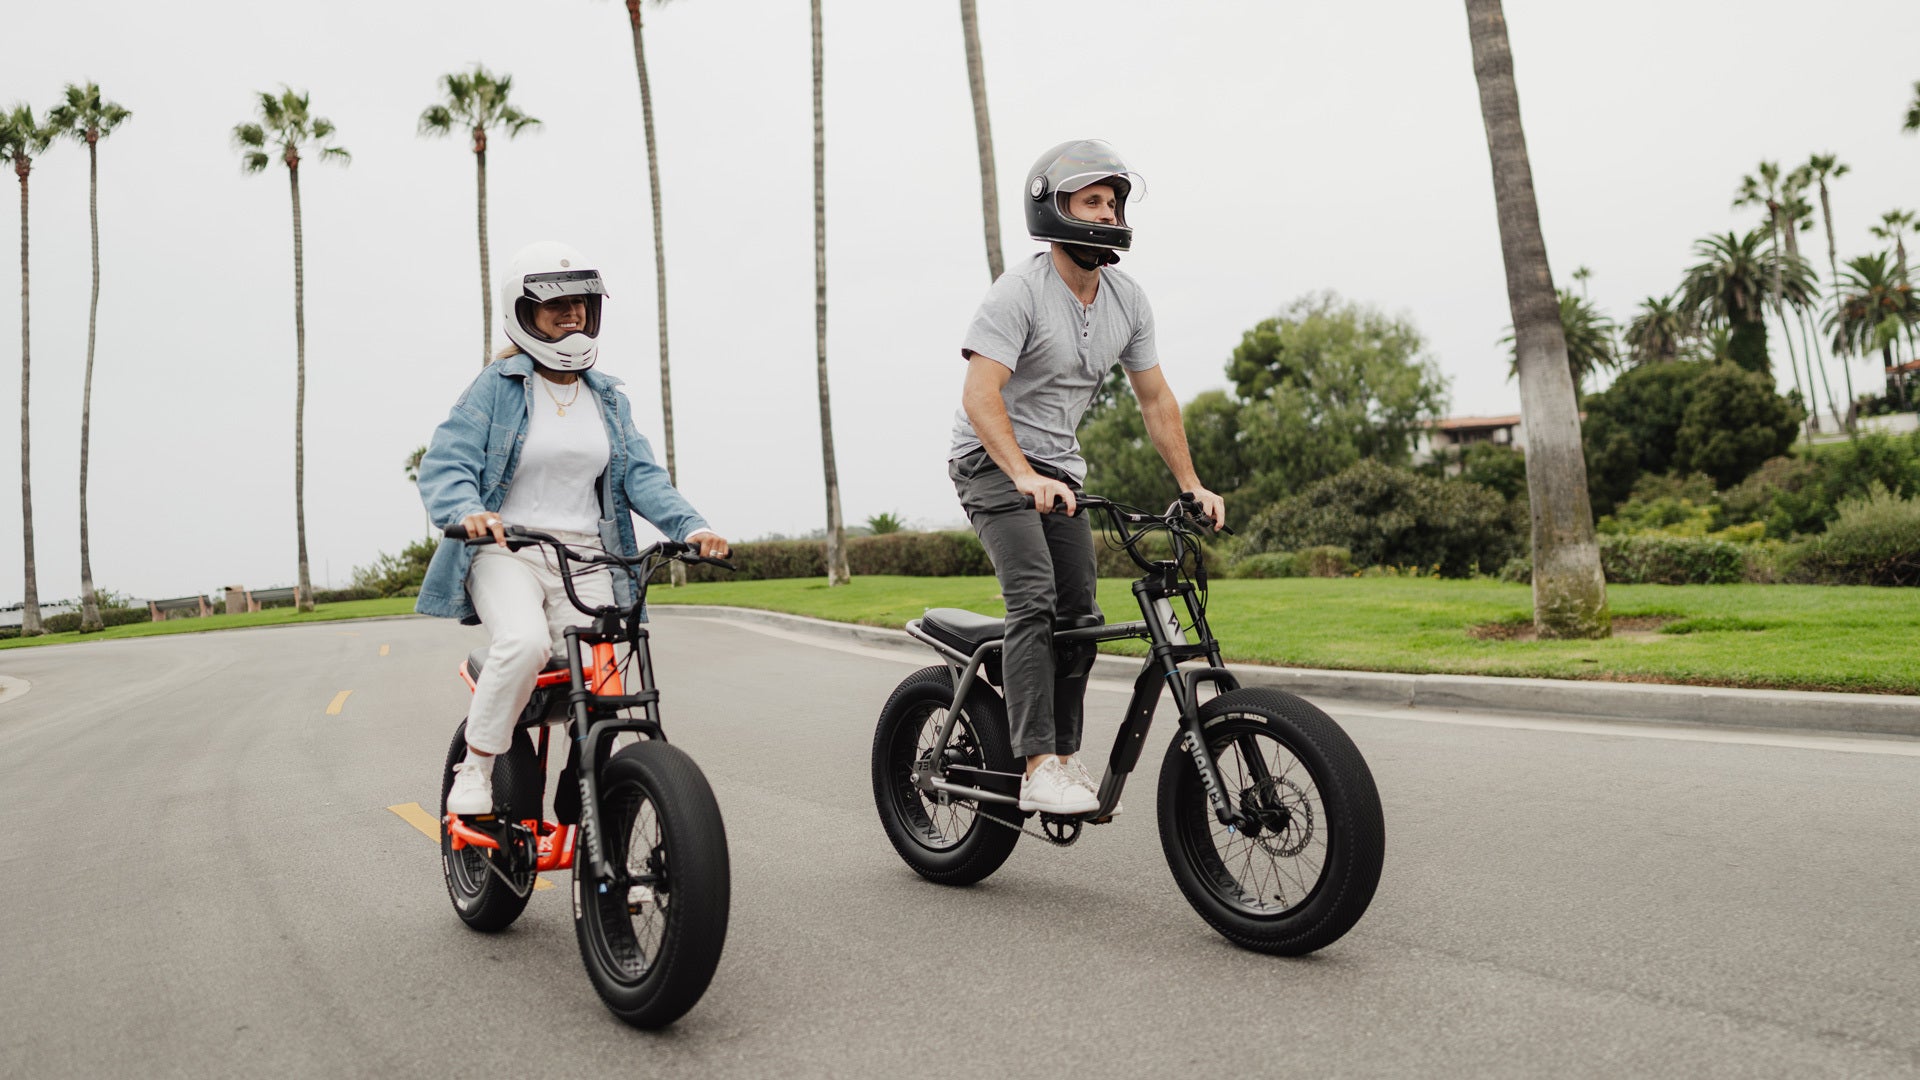 Two SUPER73 riders cruising along the street on the all-new Z Miami SE ebikes.